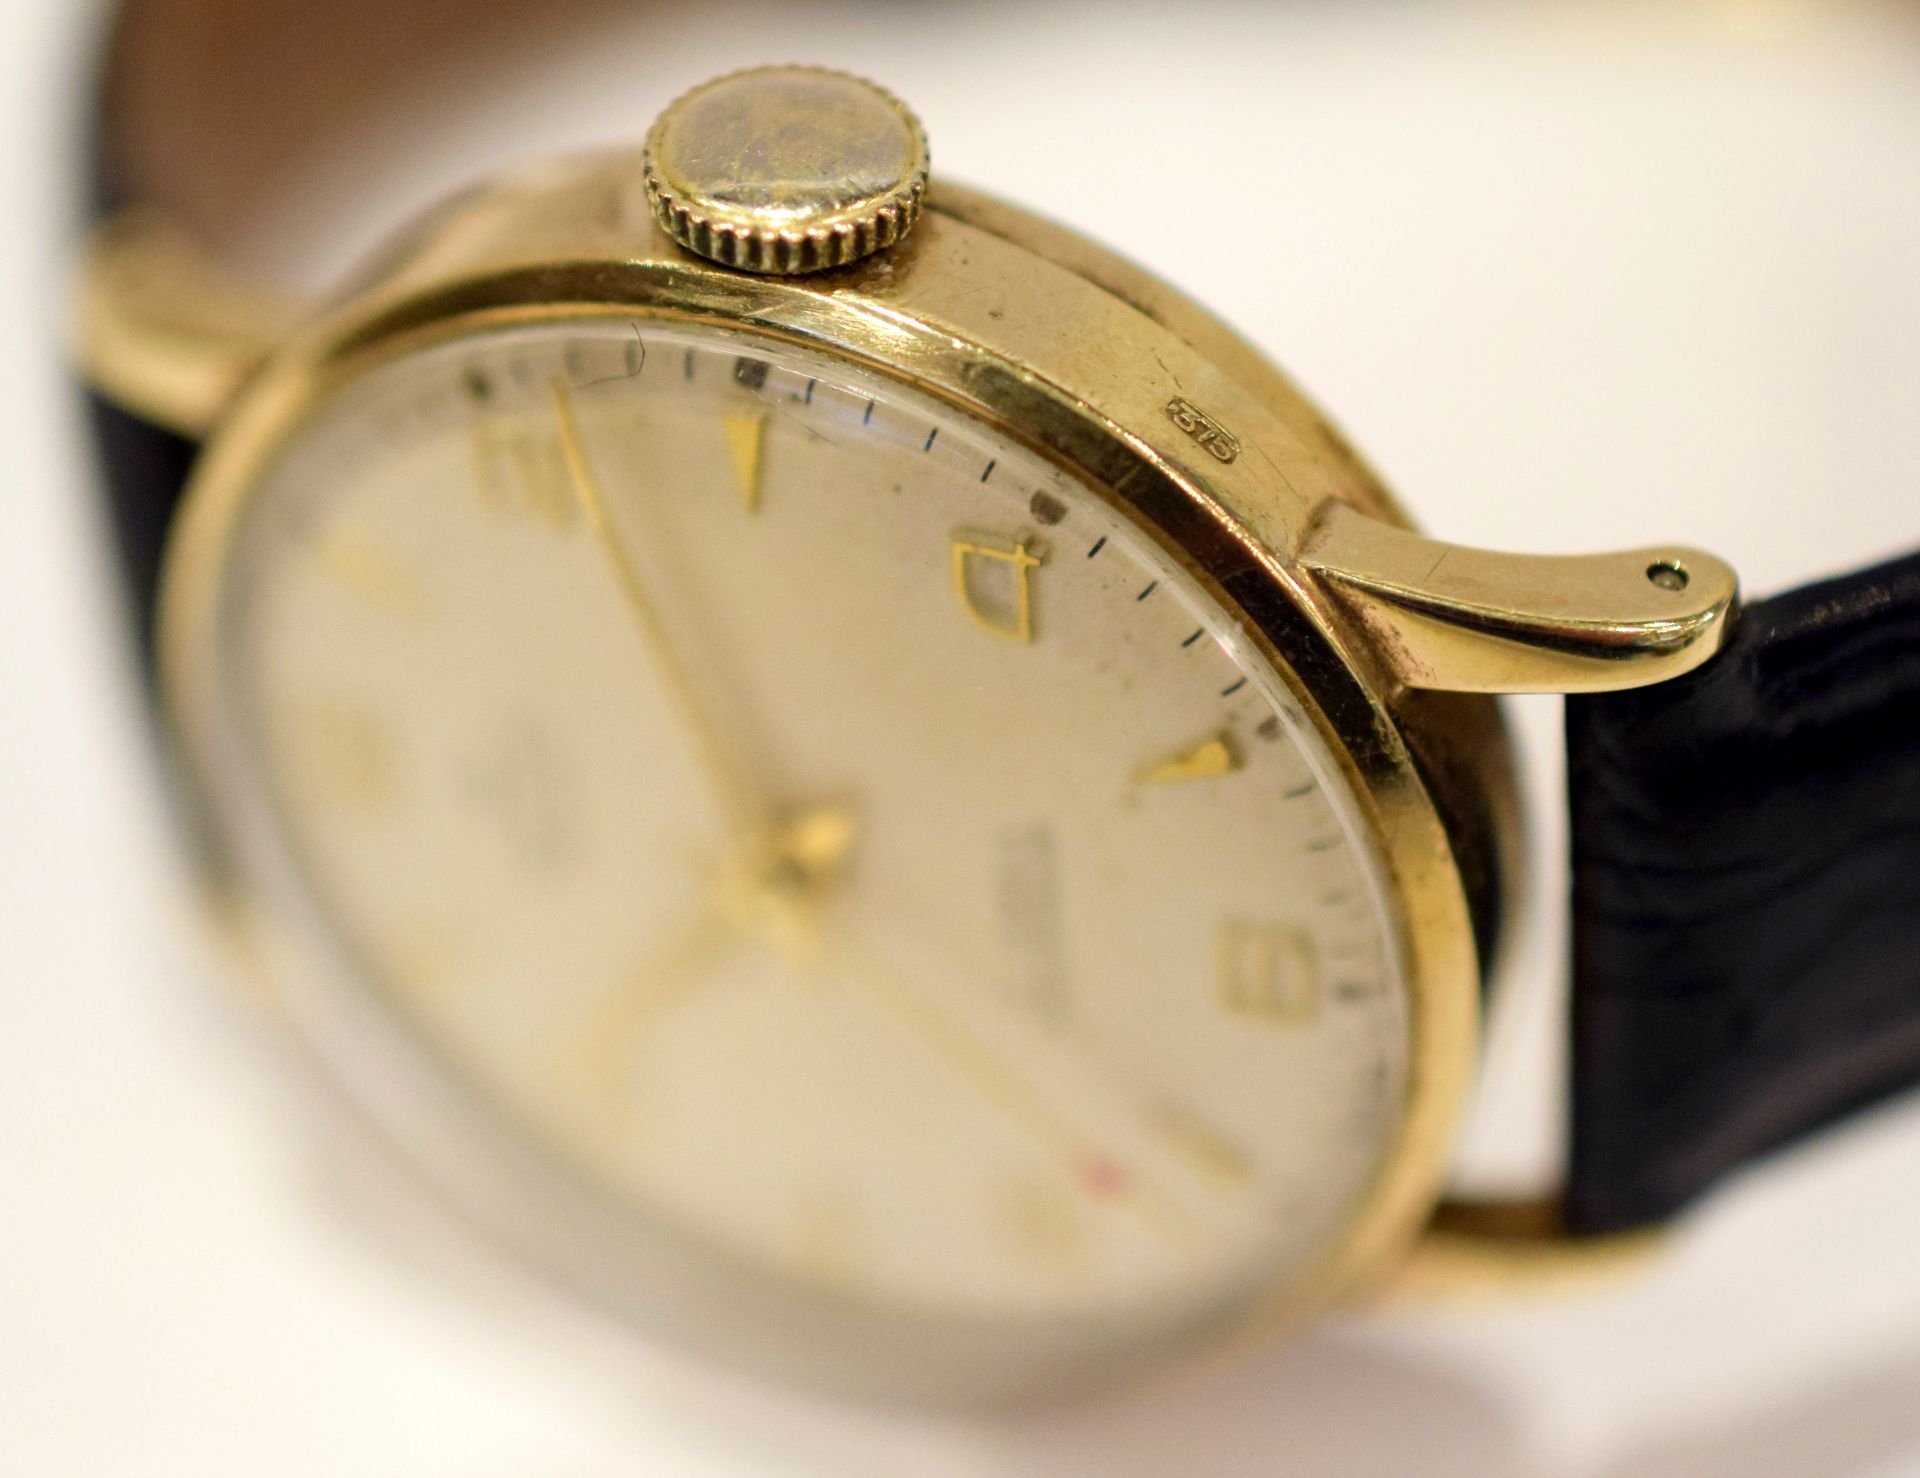 9ct Gold Smiths DeLuxe Wristwatch - Image 4 of 4